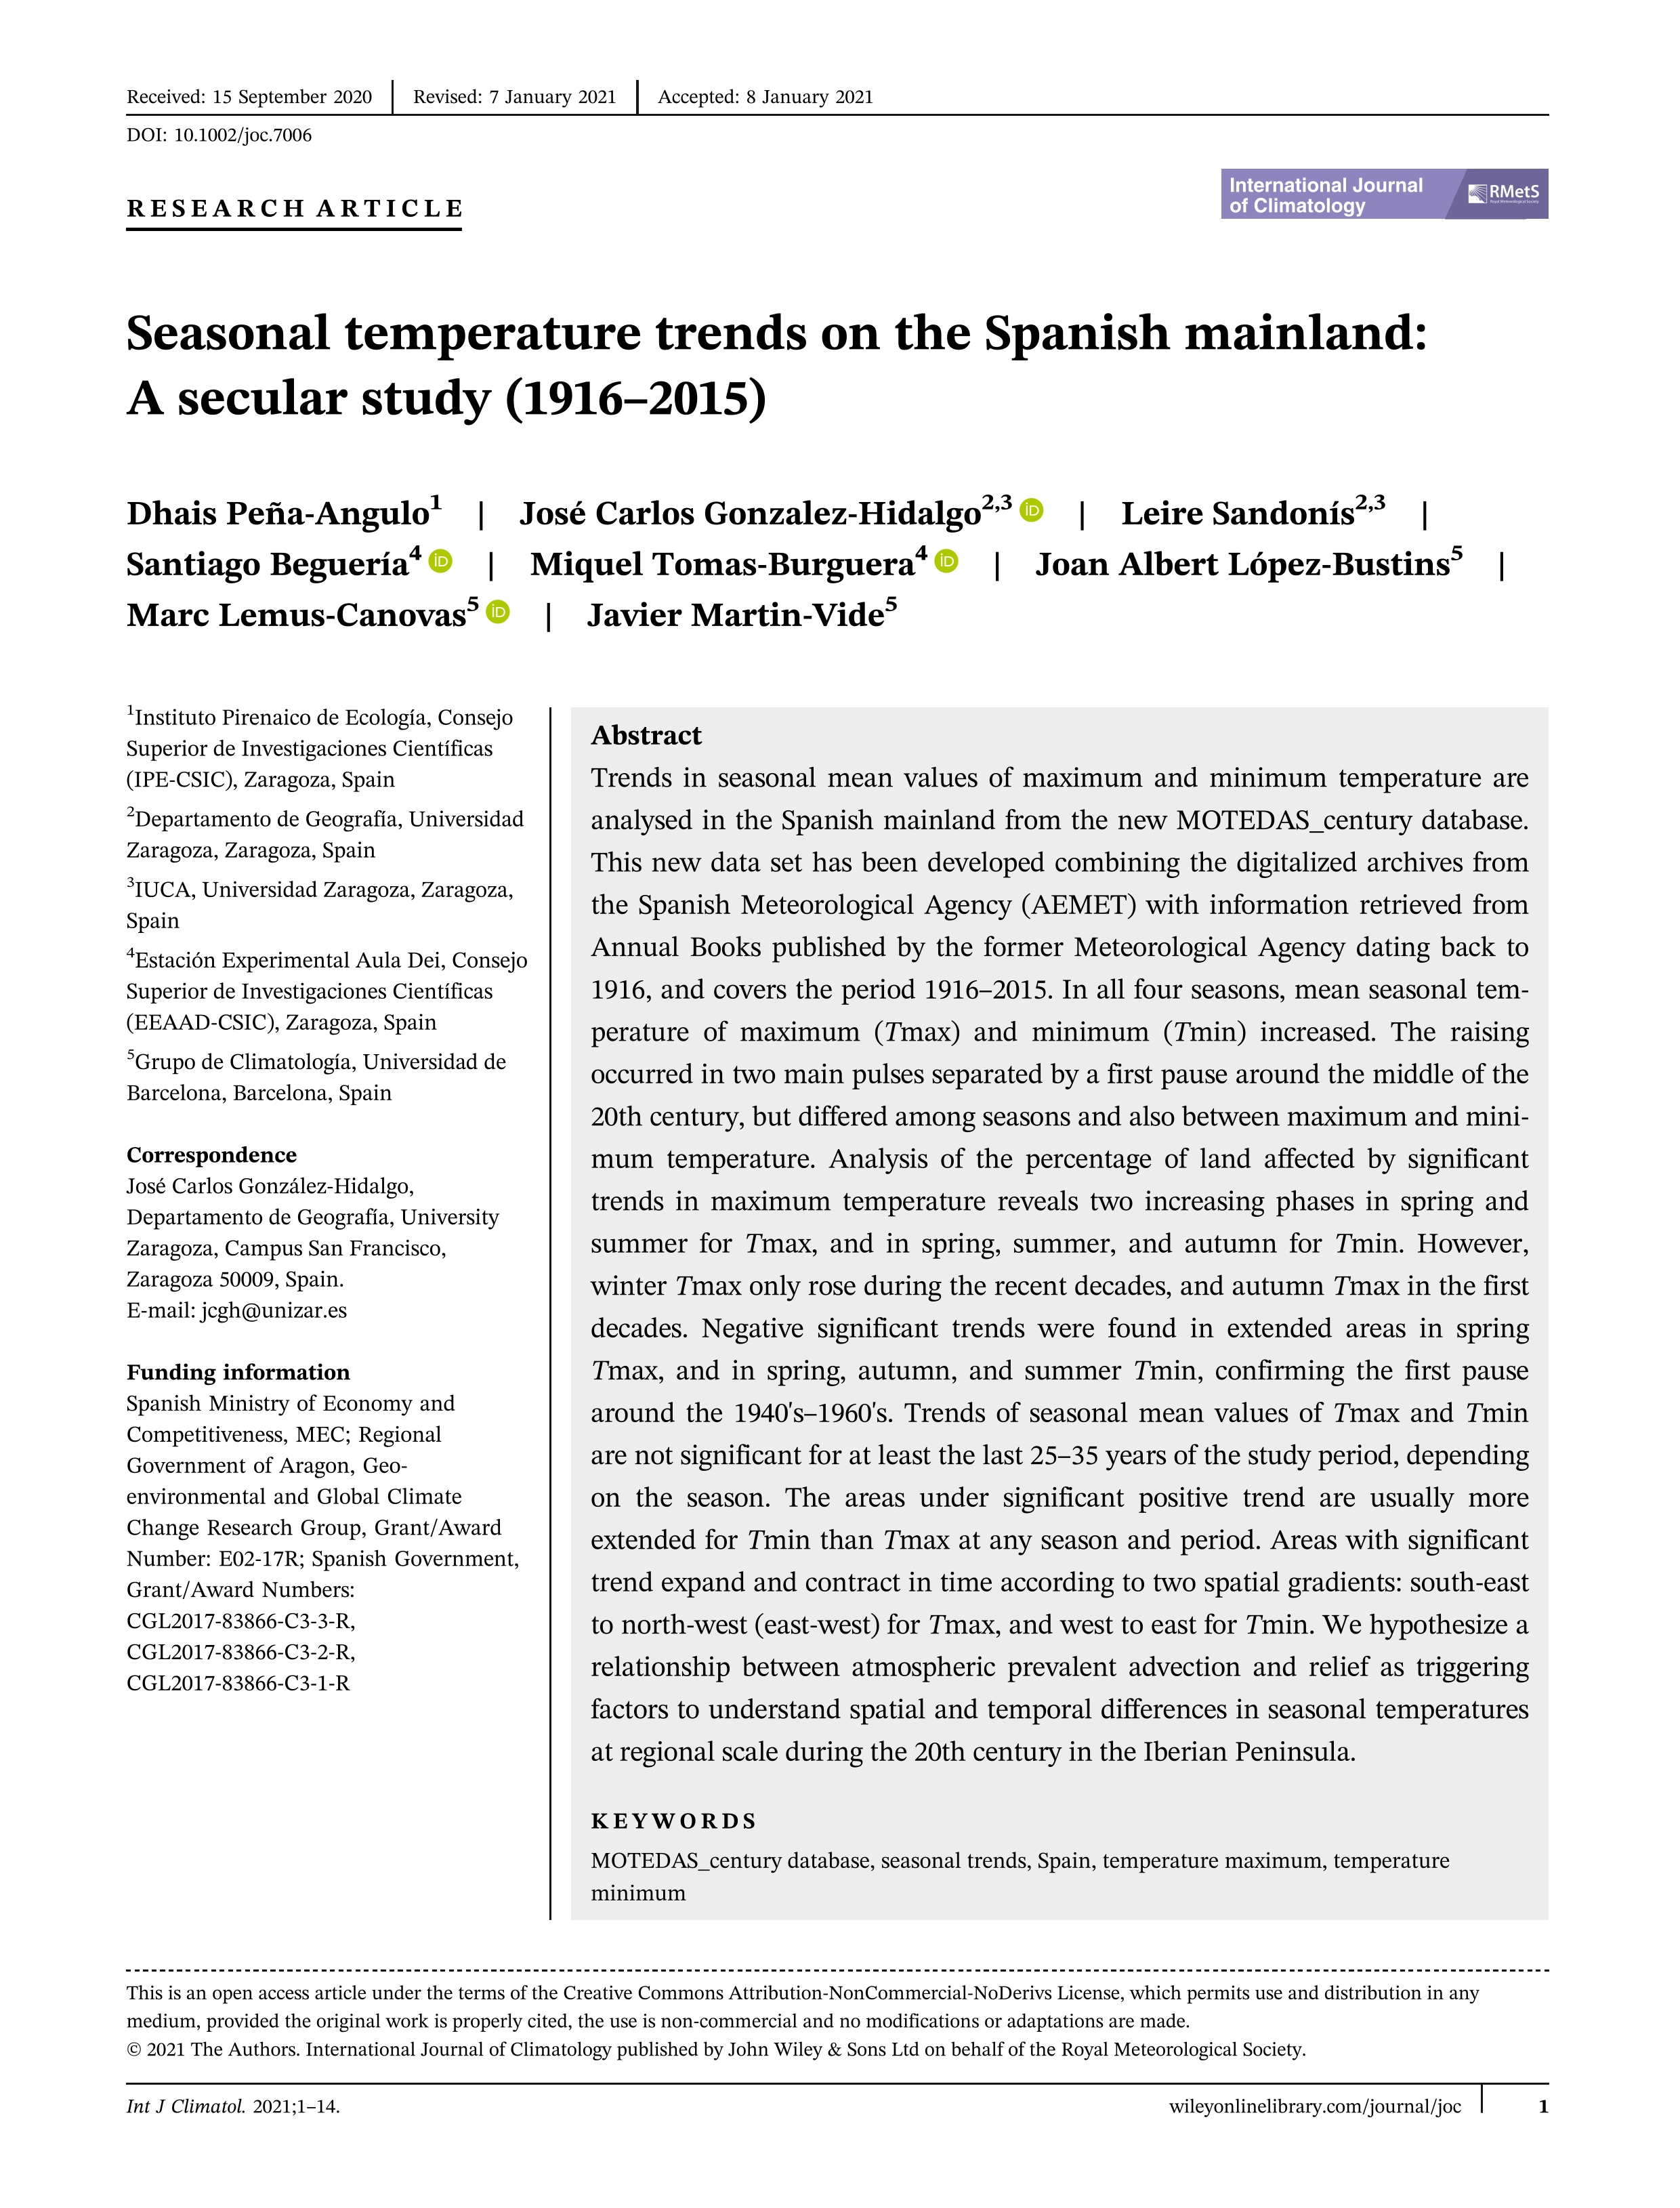 Seasonal temperature trends on the Spanish mainland: A secular study (1916–2015)